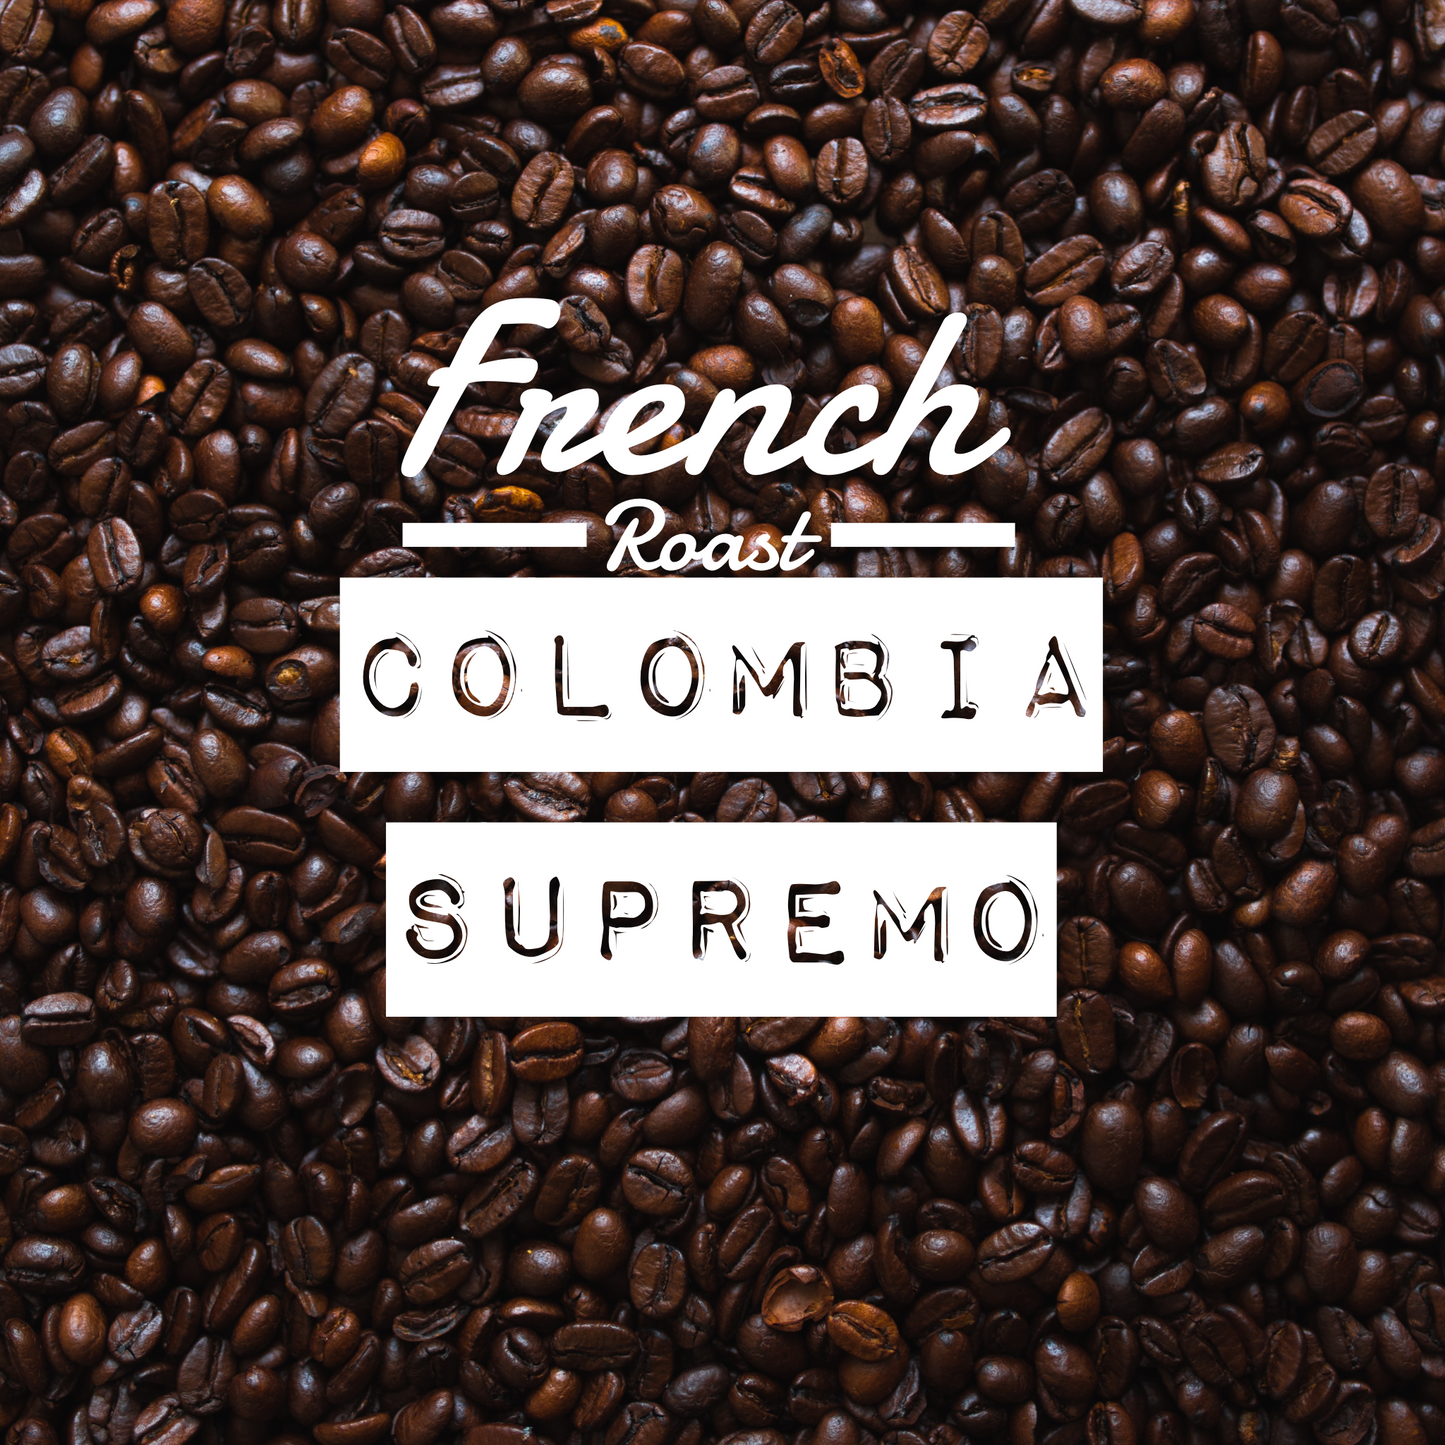 Colombia Supremo French Roast